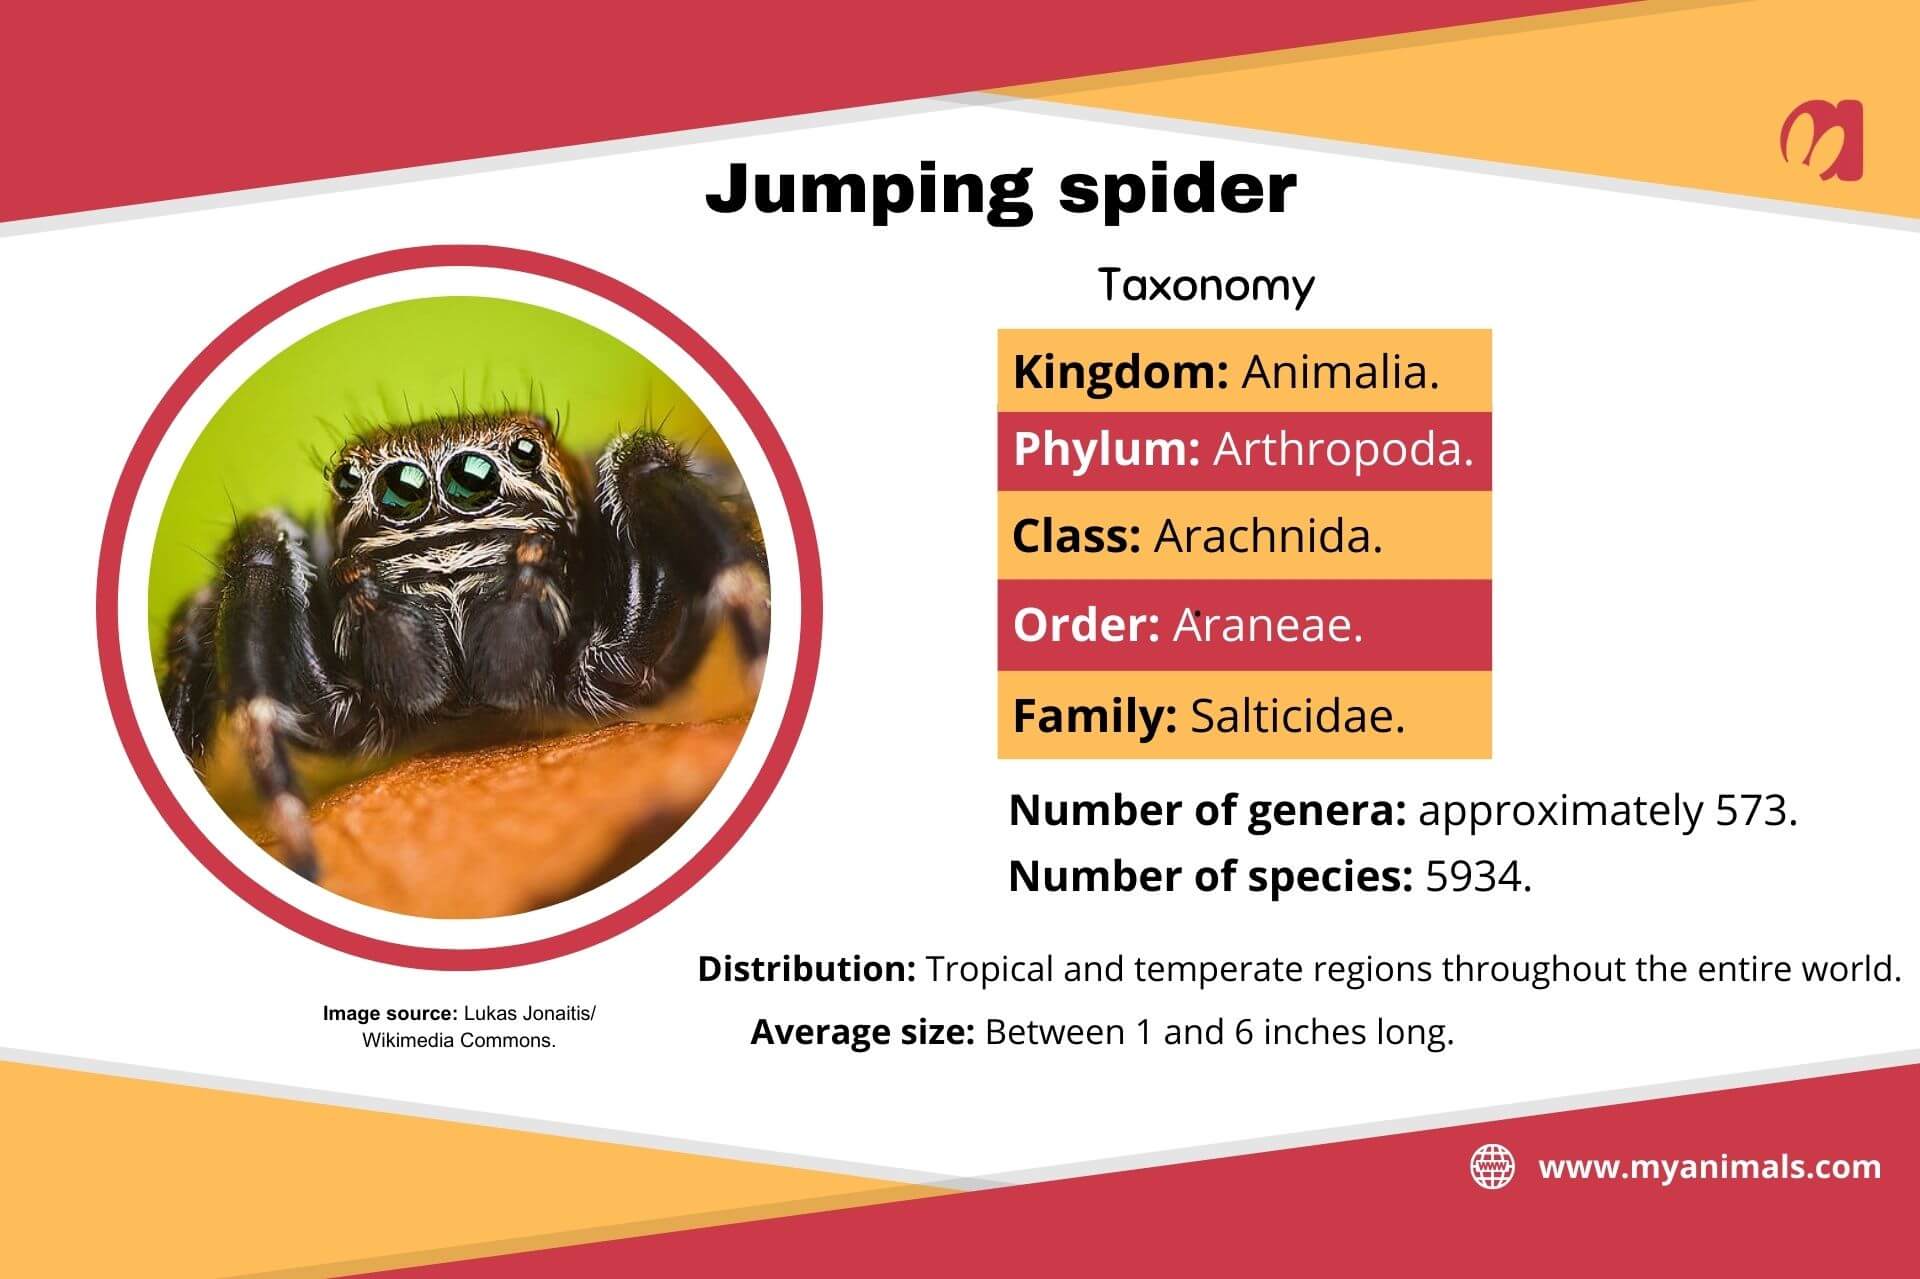 Information on jumping spiders.